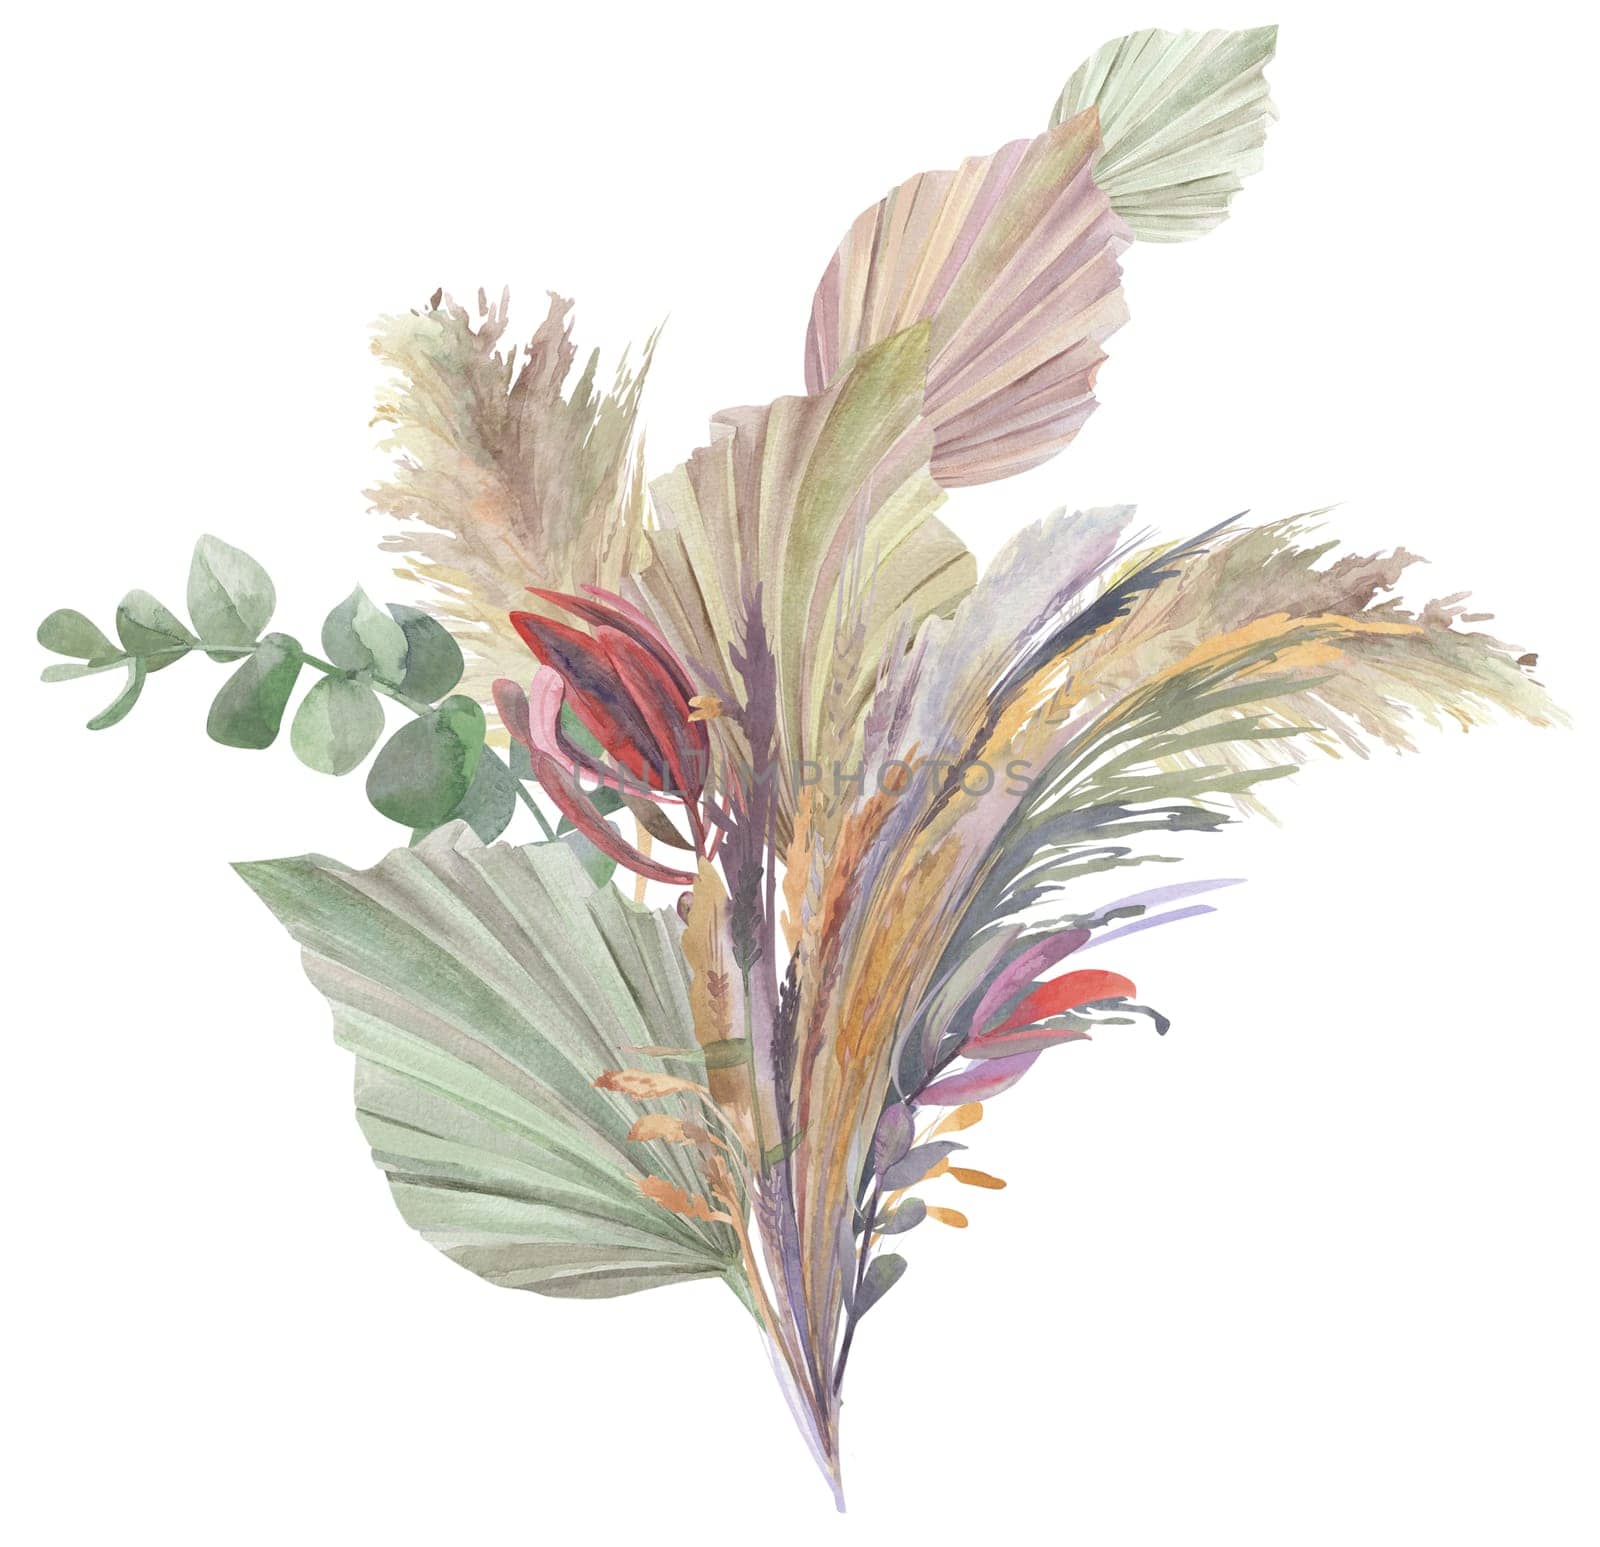 Bouquet of tropical dried flowers with palm branches painted in watercolor by MarinaVoyush